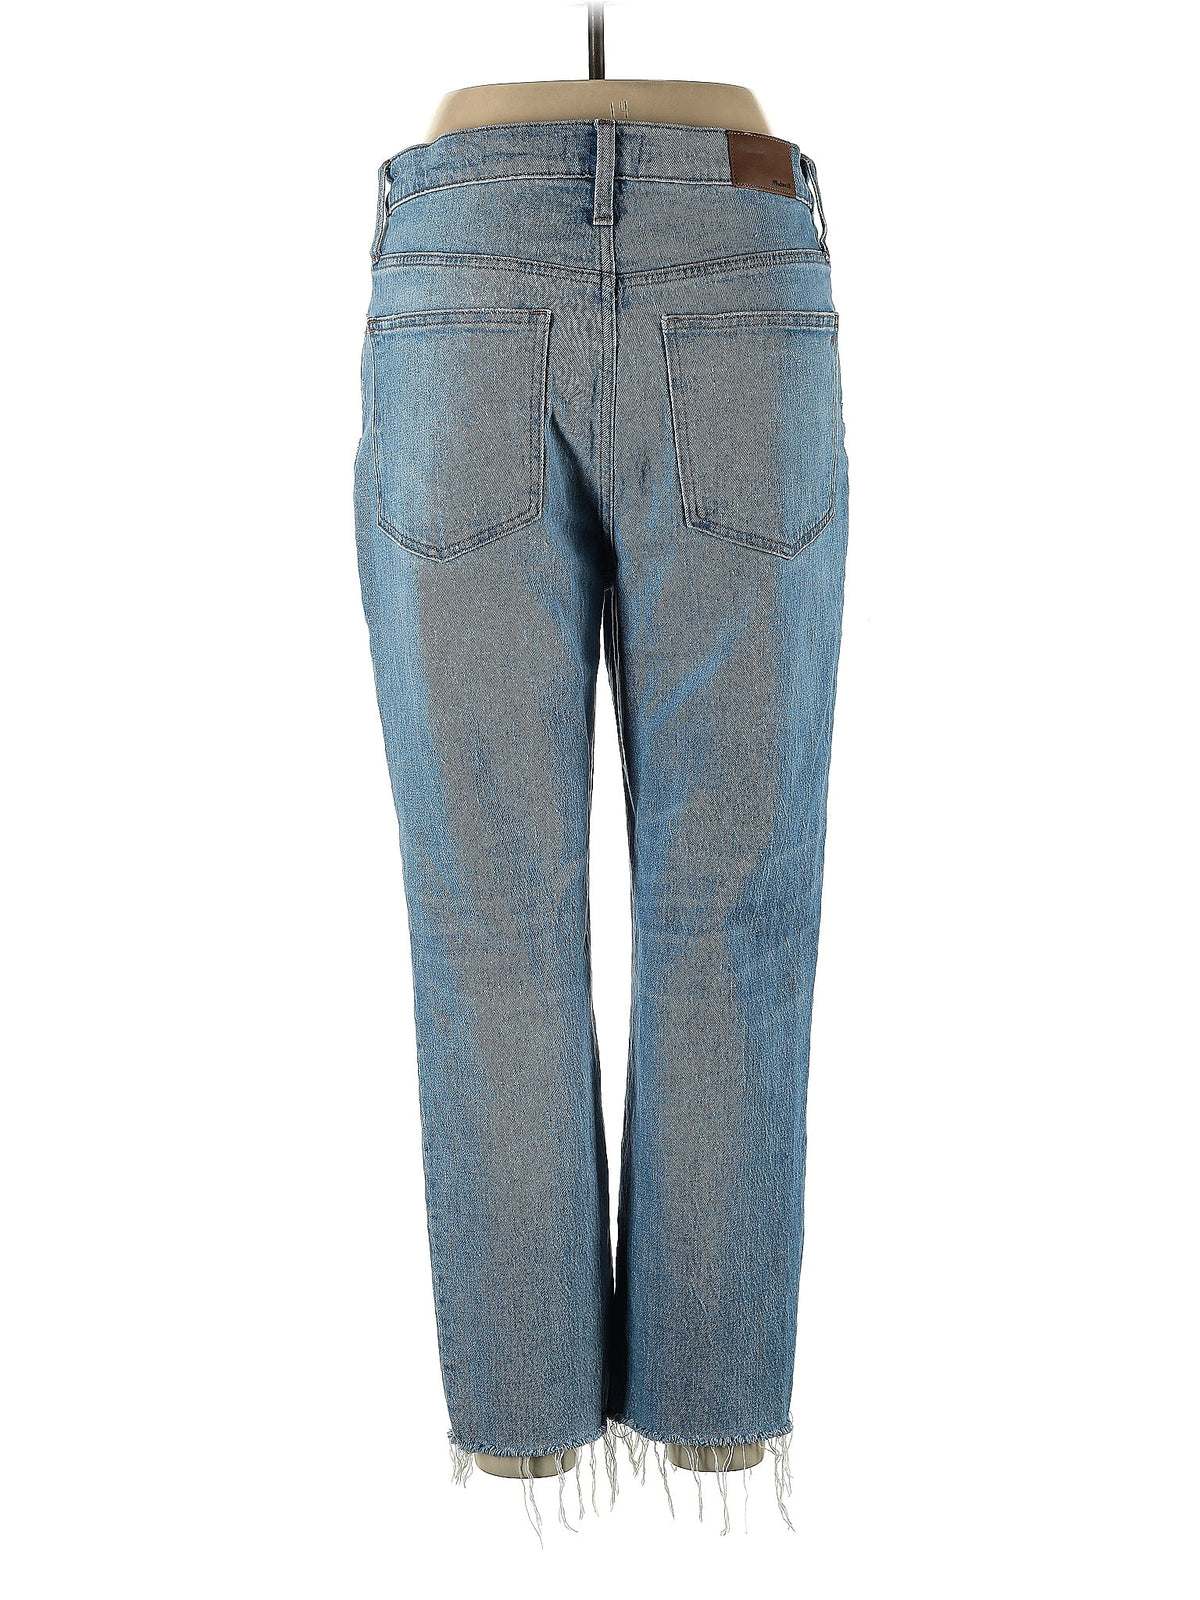 High-Rise Boyjeans The Perfect Vintage Jean In Rosabelle Wash: Comfort Stretch Edition in Light Wash waist size - 32